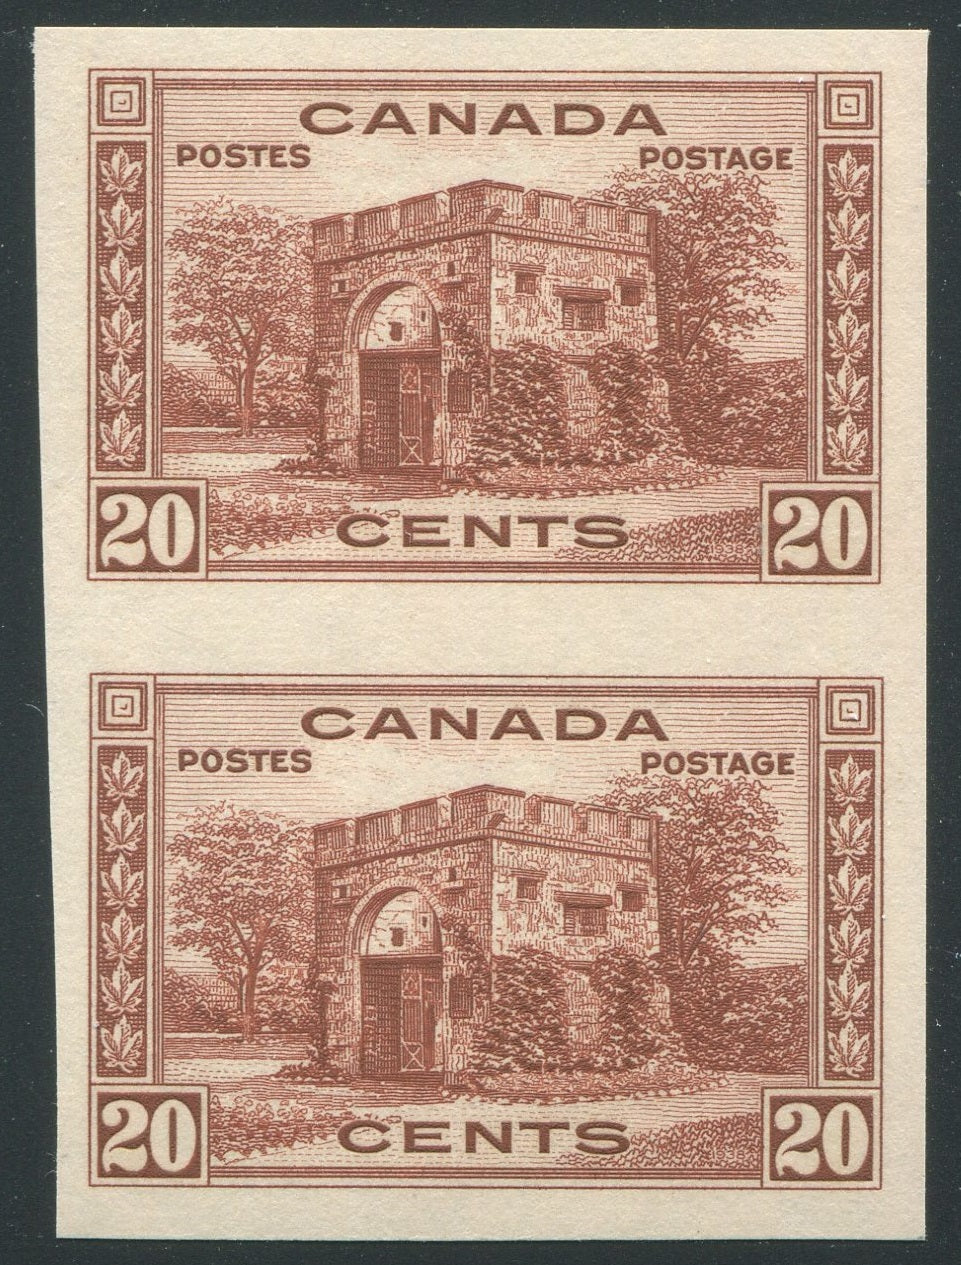 0243CA1906 - Canada #243a - Mint Imperf Pair